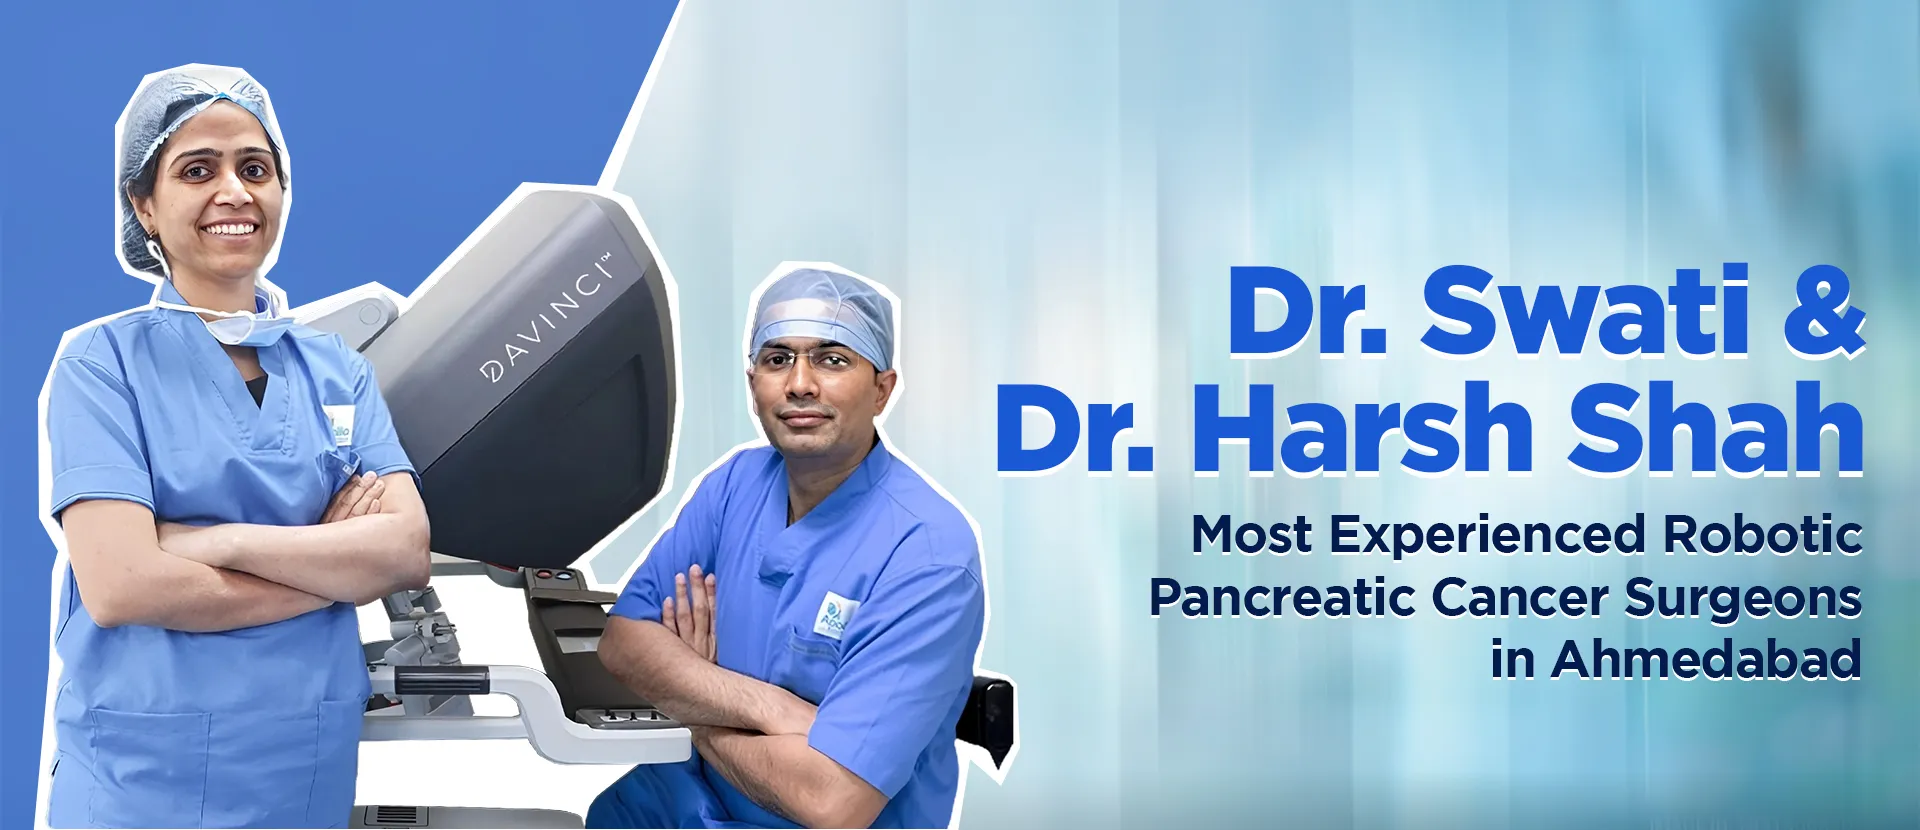 Best Pancreatic cancer Treatment with Robotic Surgery in Ahmedabad, Gujarat, India